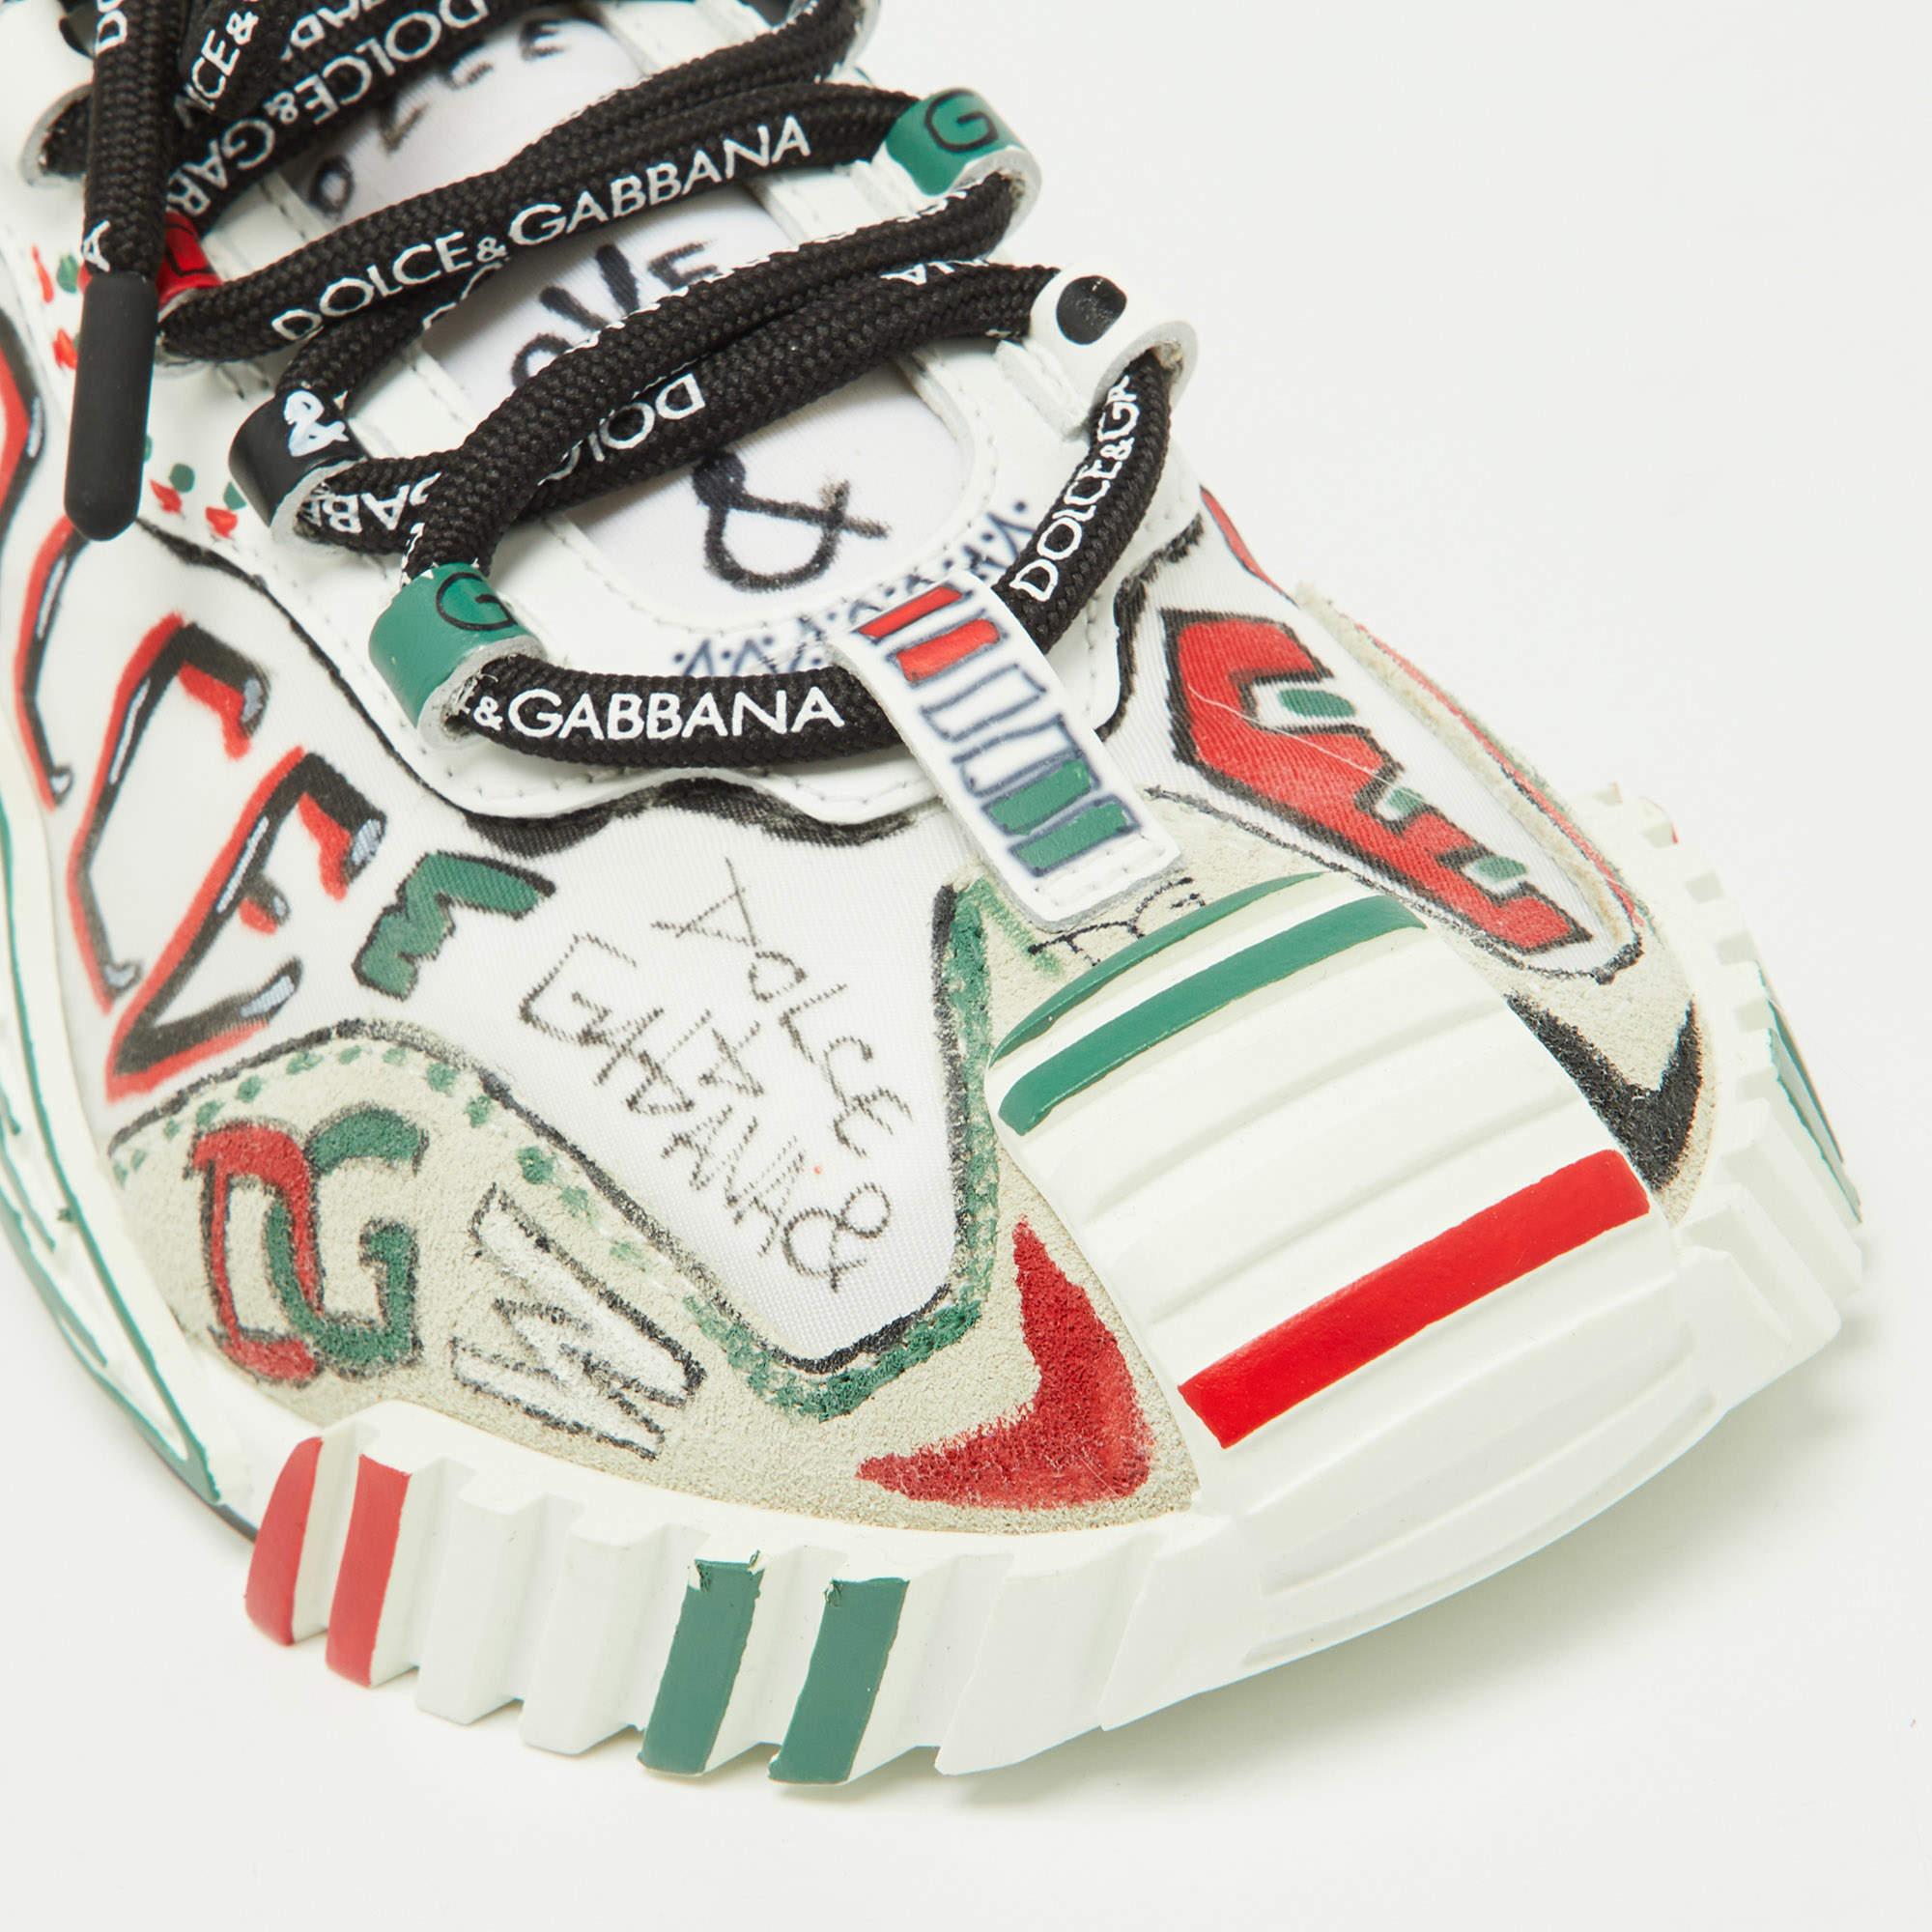 Dolce & Gabbana Multicolor Neoprene and Suede Miami Ns1 Low Top Sneakers Size 38 For Sale 1